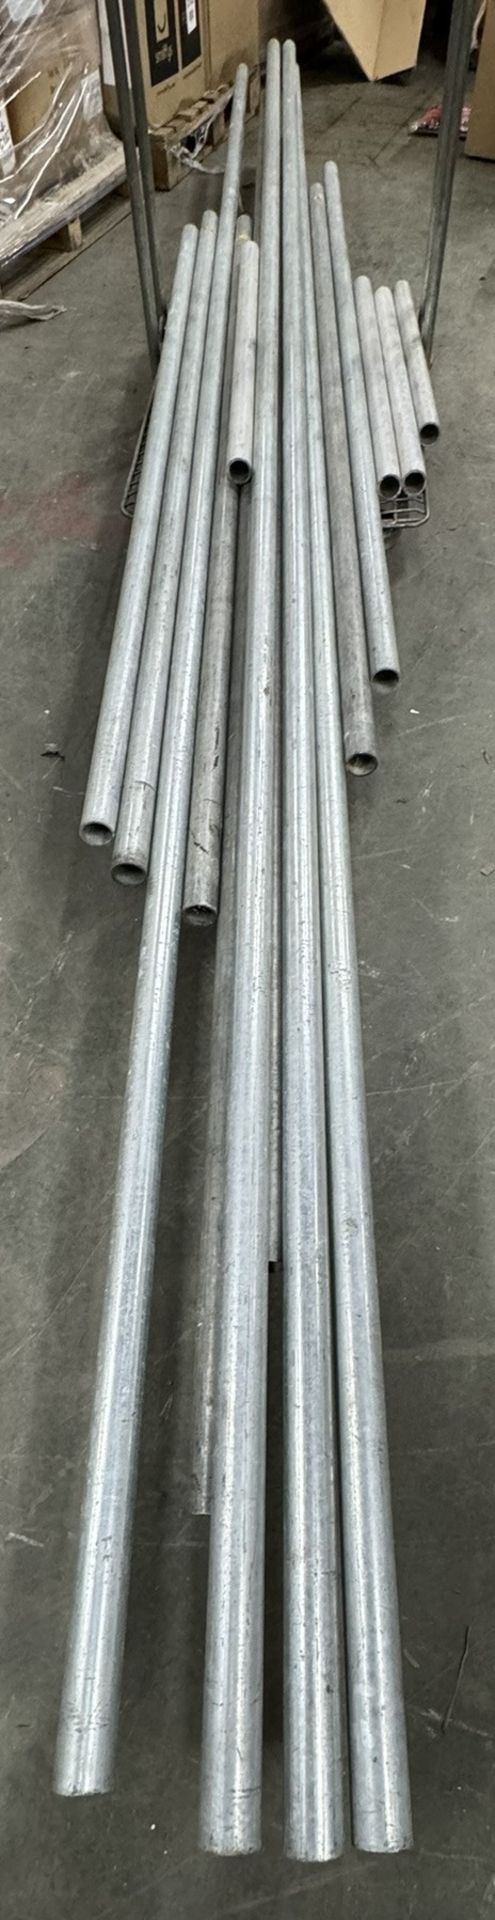 30 x Various Sized Scaffolding Bars / Tubes - As Pictured - Image 4 of 6